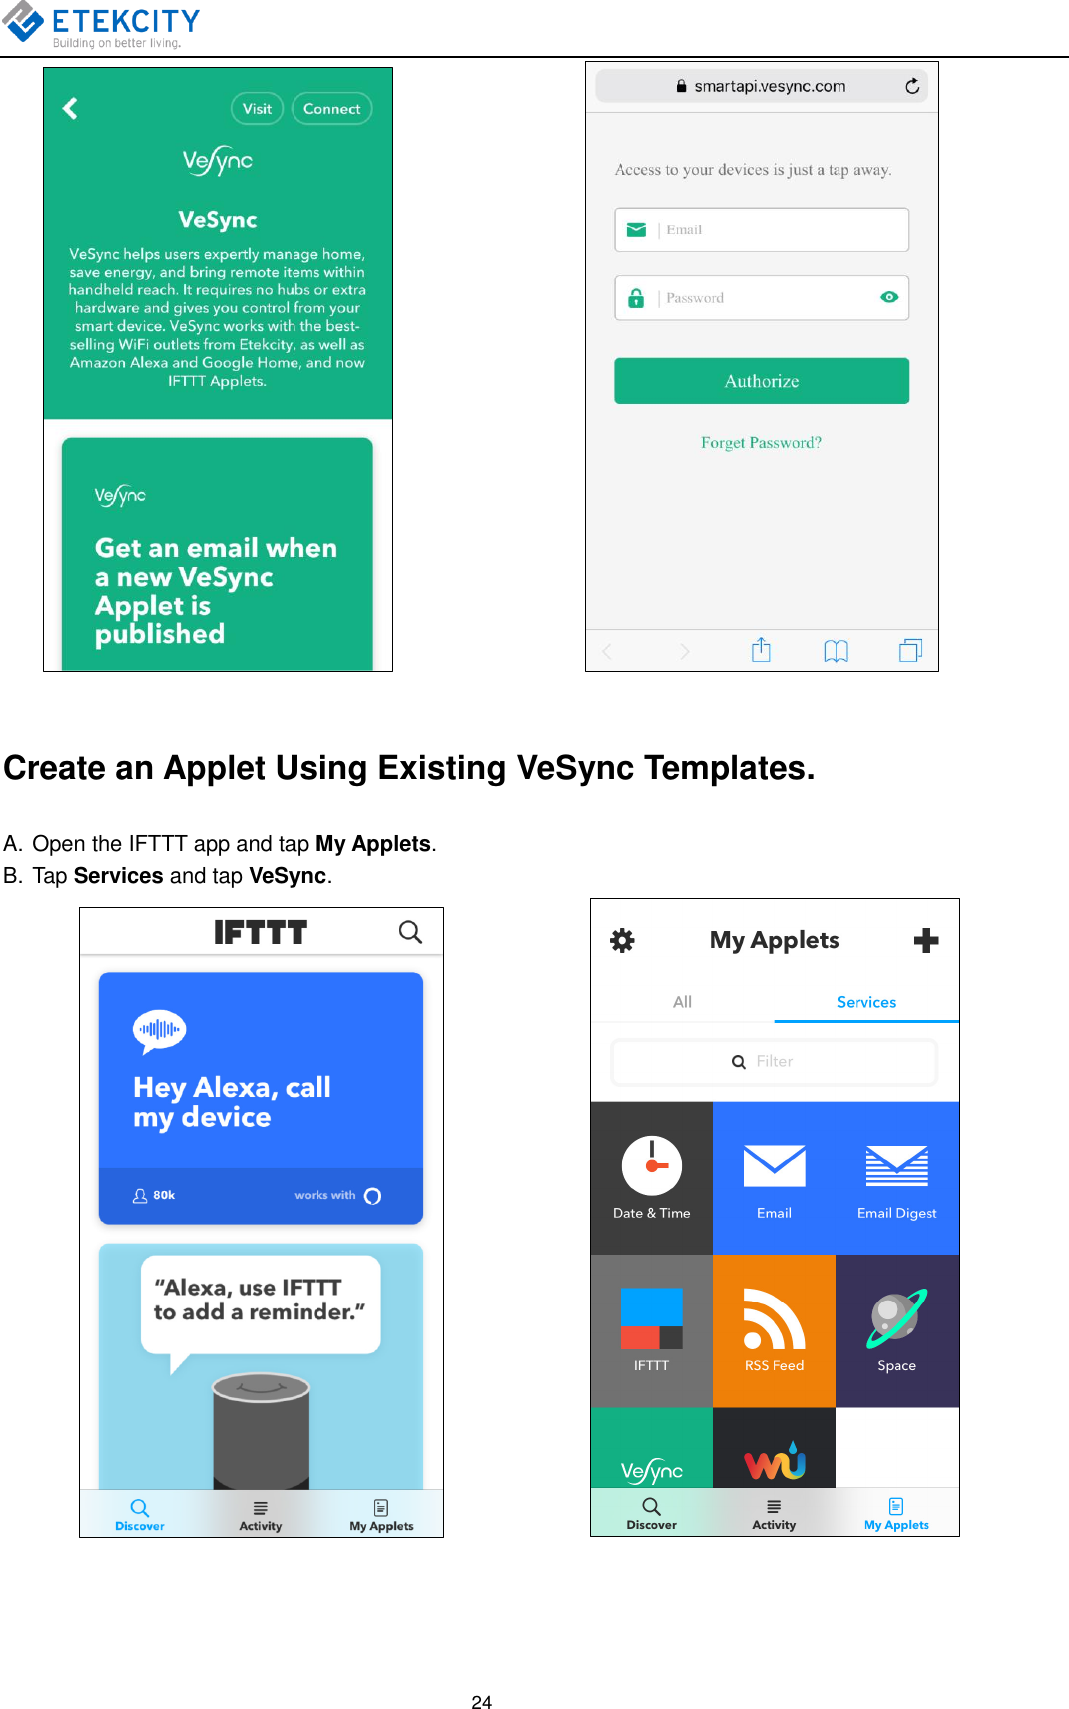   24                     Create an Applet Using Existing VeSync Templates. A. Open the IFTTT app and tap My Applets. B. Tap Services and tap VeSync.                   